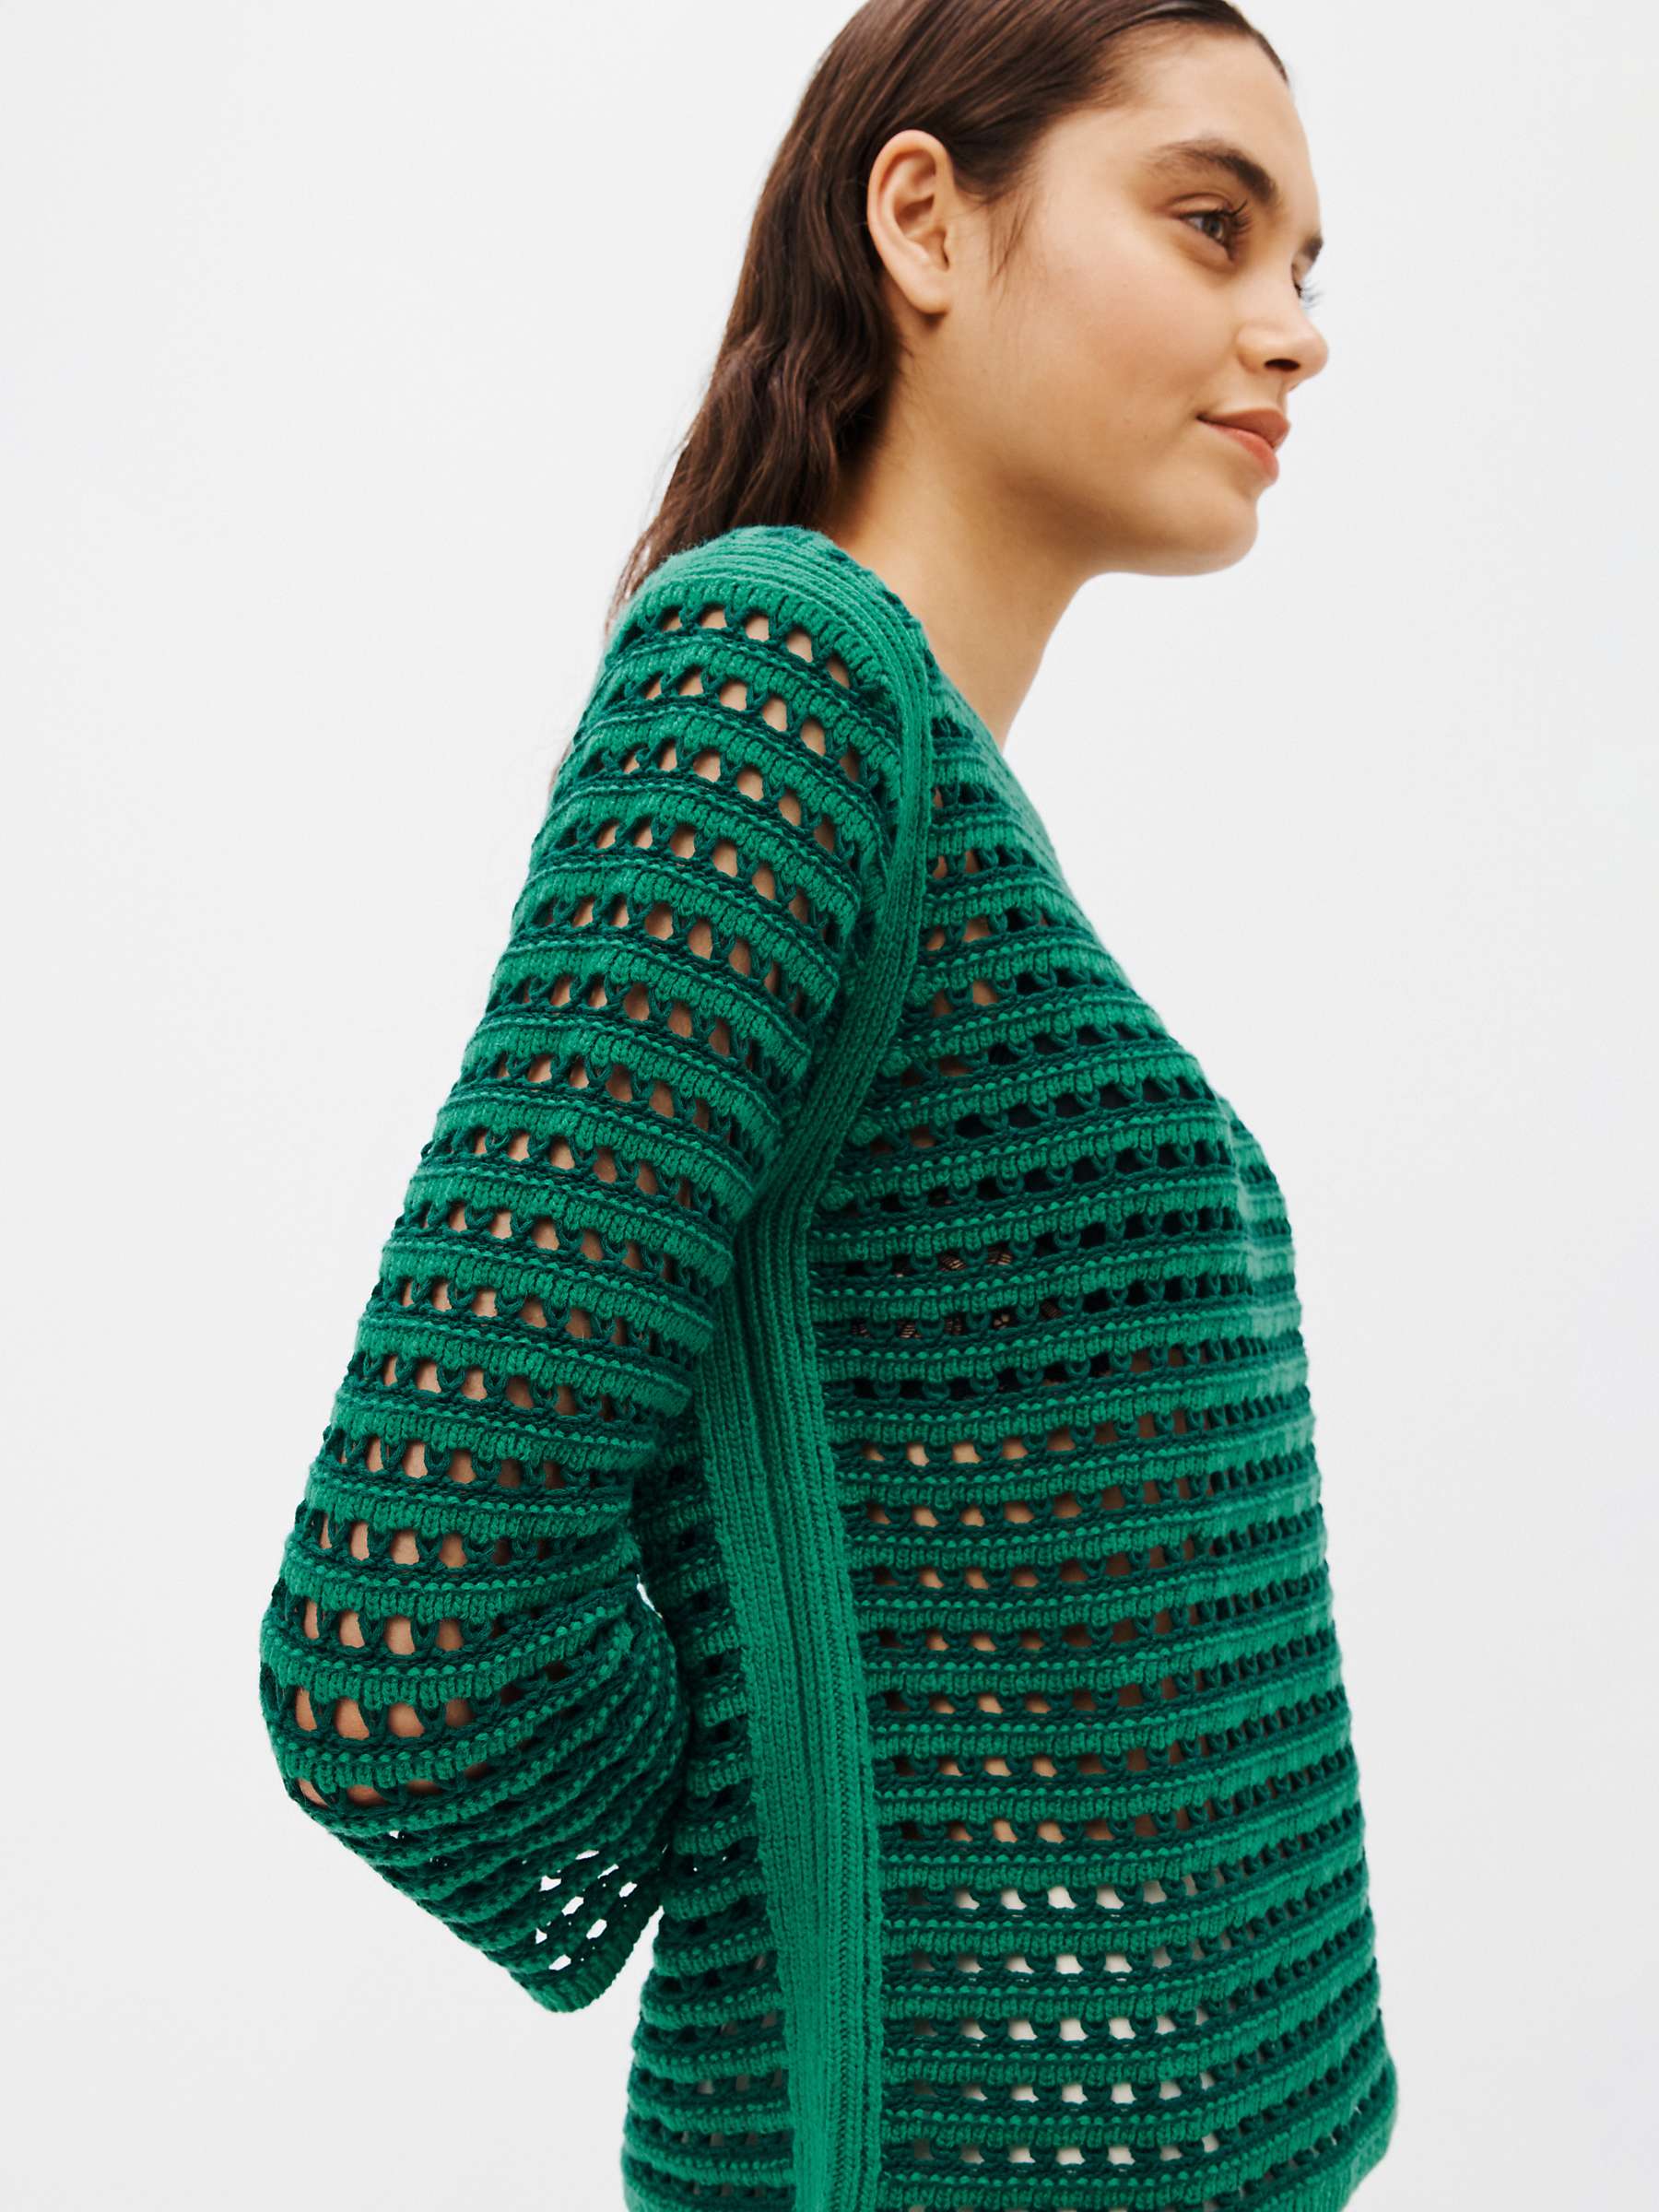 See By Chloé Crochet Knit Jumper, Lively Pine at John Lewis & Partners